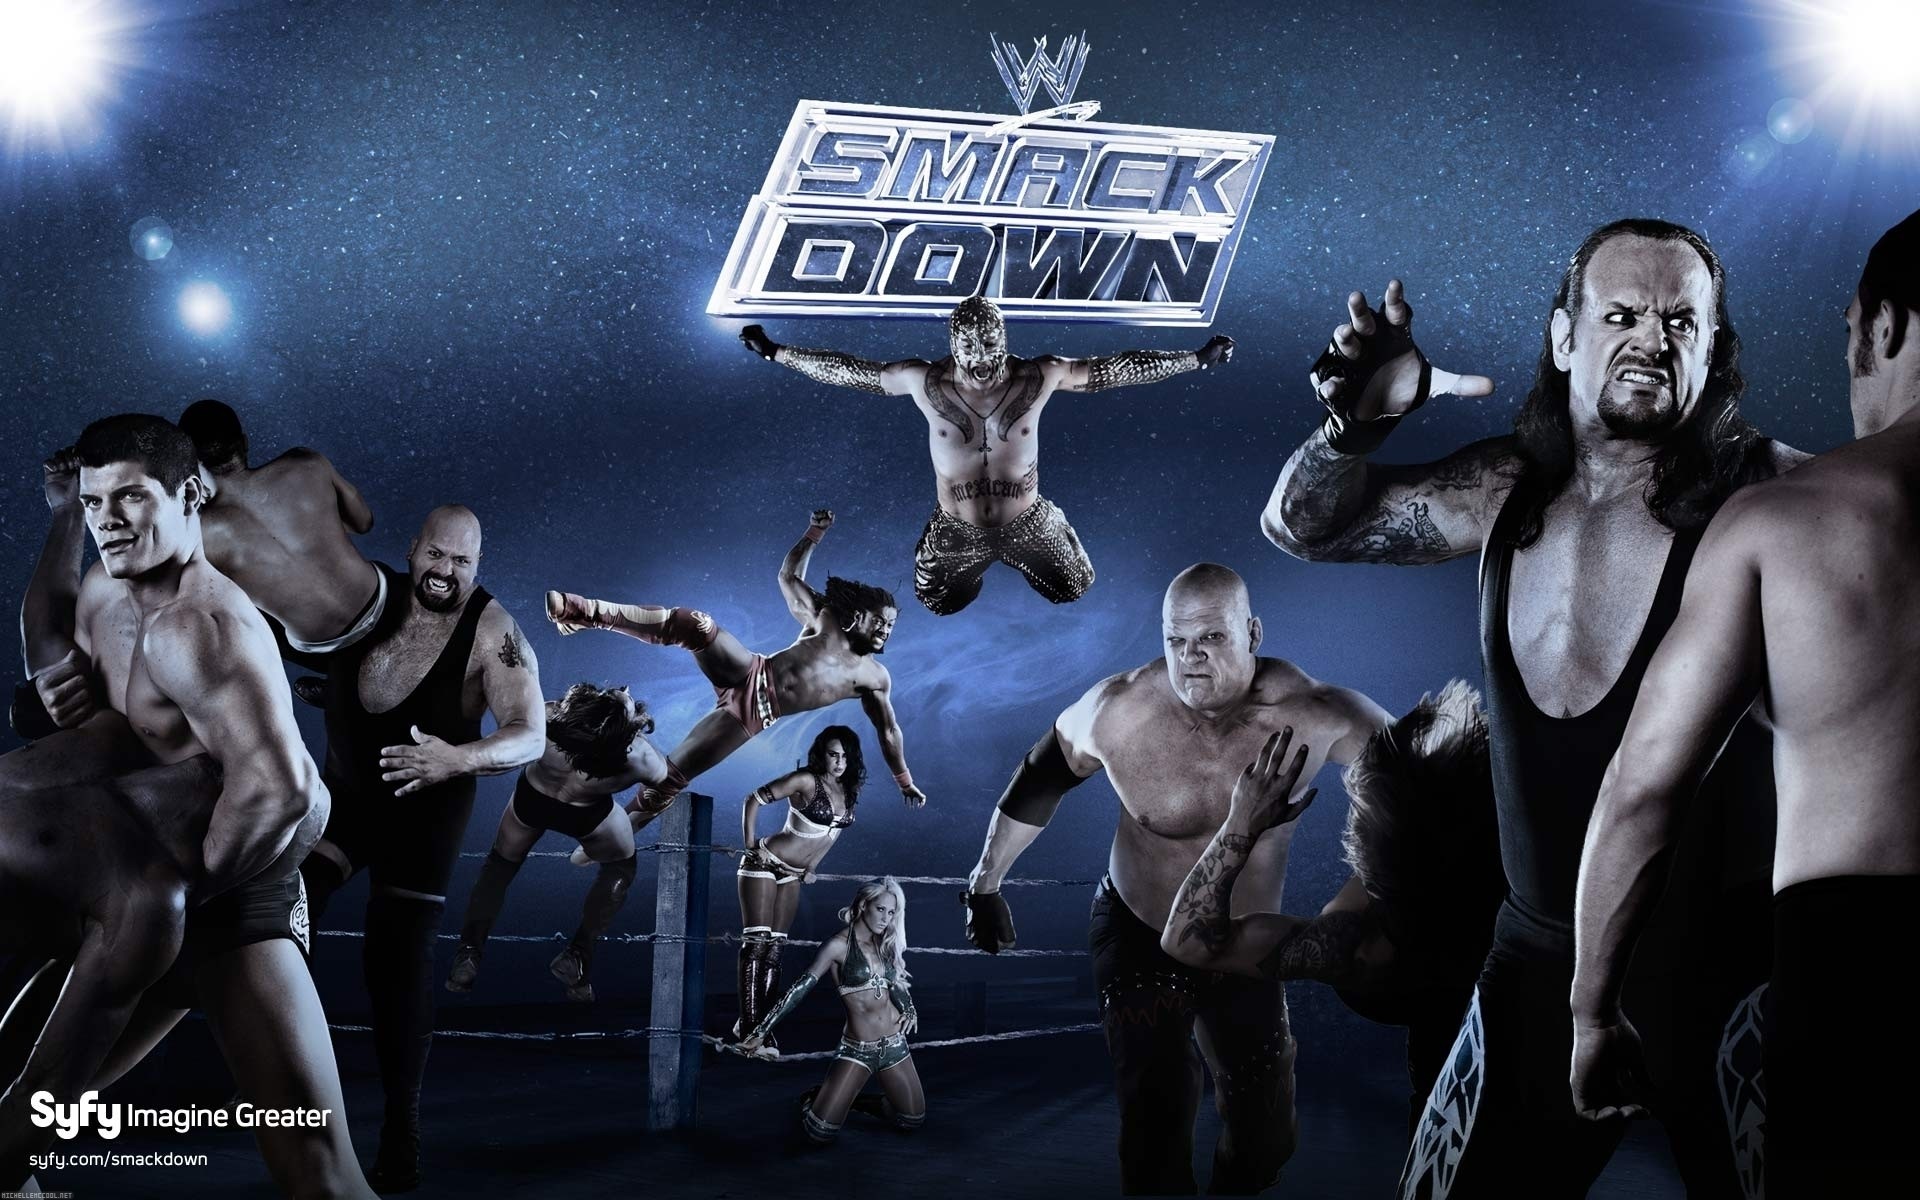 Wwe smackdown wallpapers pictures